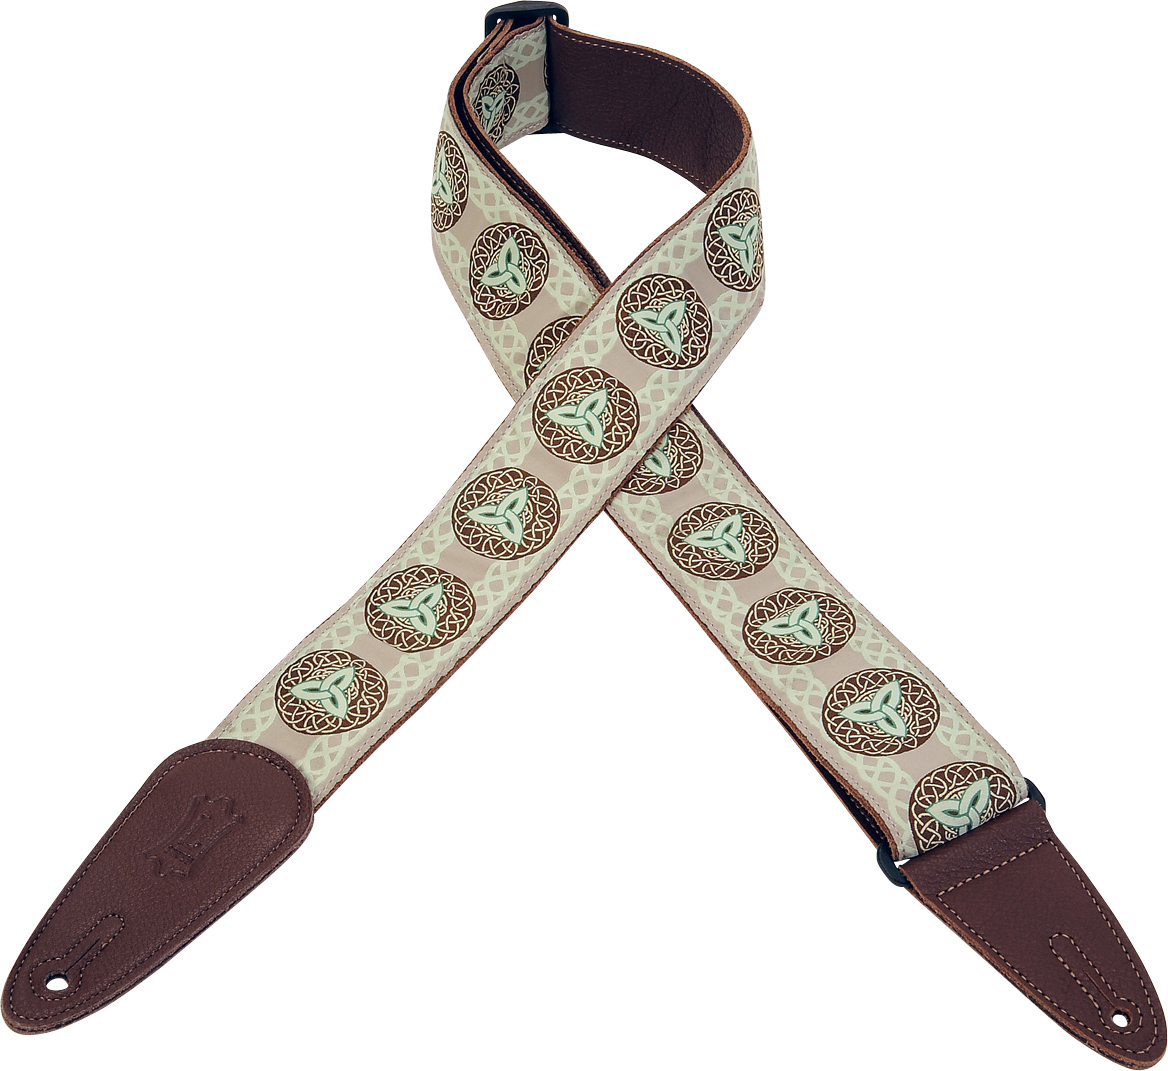 Levy's Mgj-002 - Guitar strap - Main picture